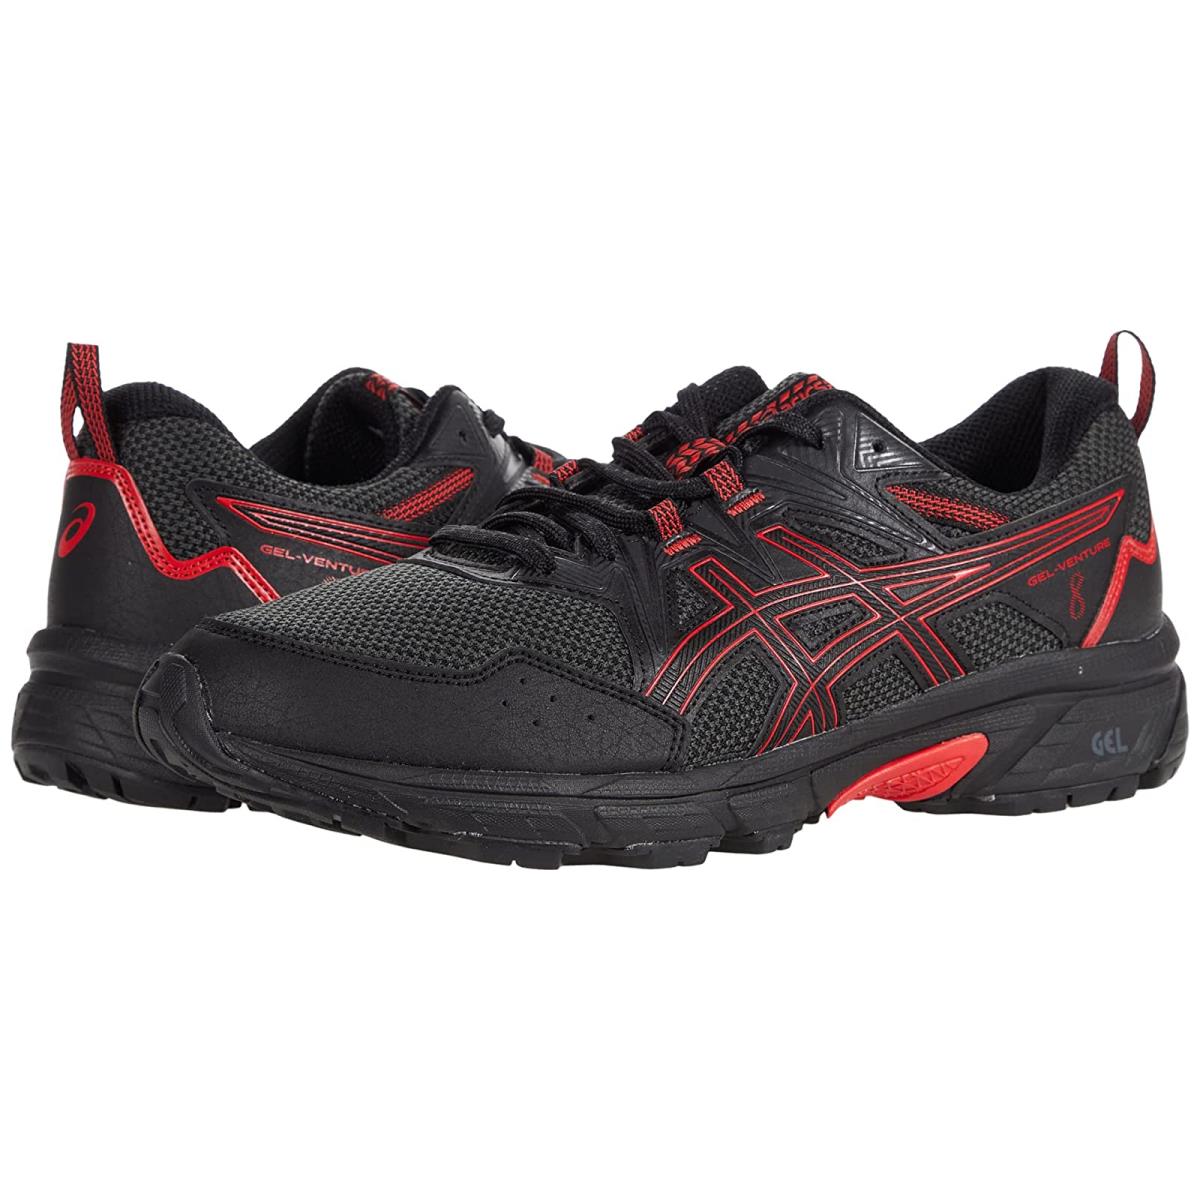 Man`s Sneakers Athletic Shoes Asics Gel-venture 8 Black/Electric Red